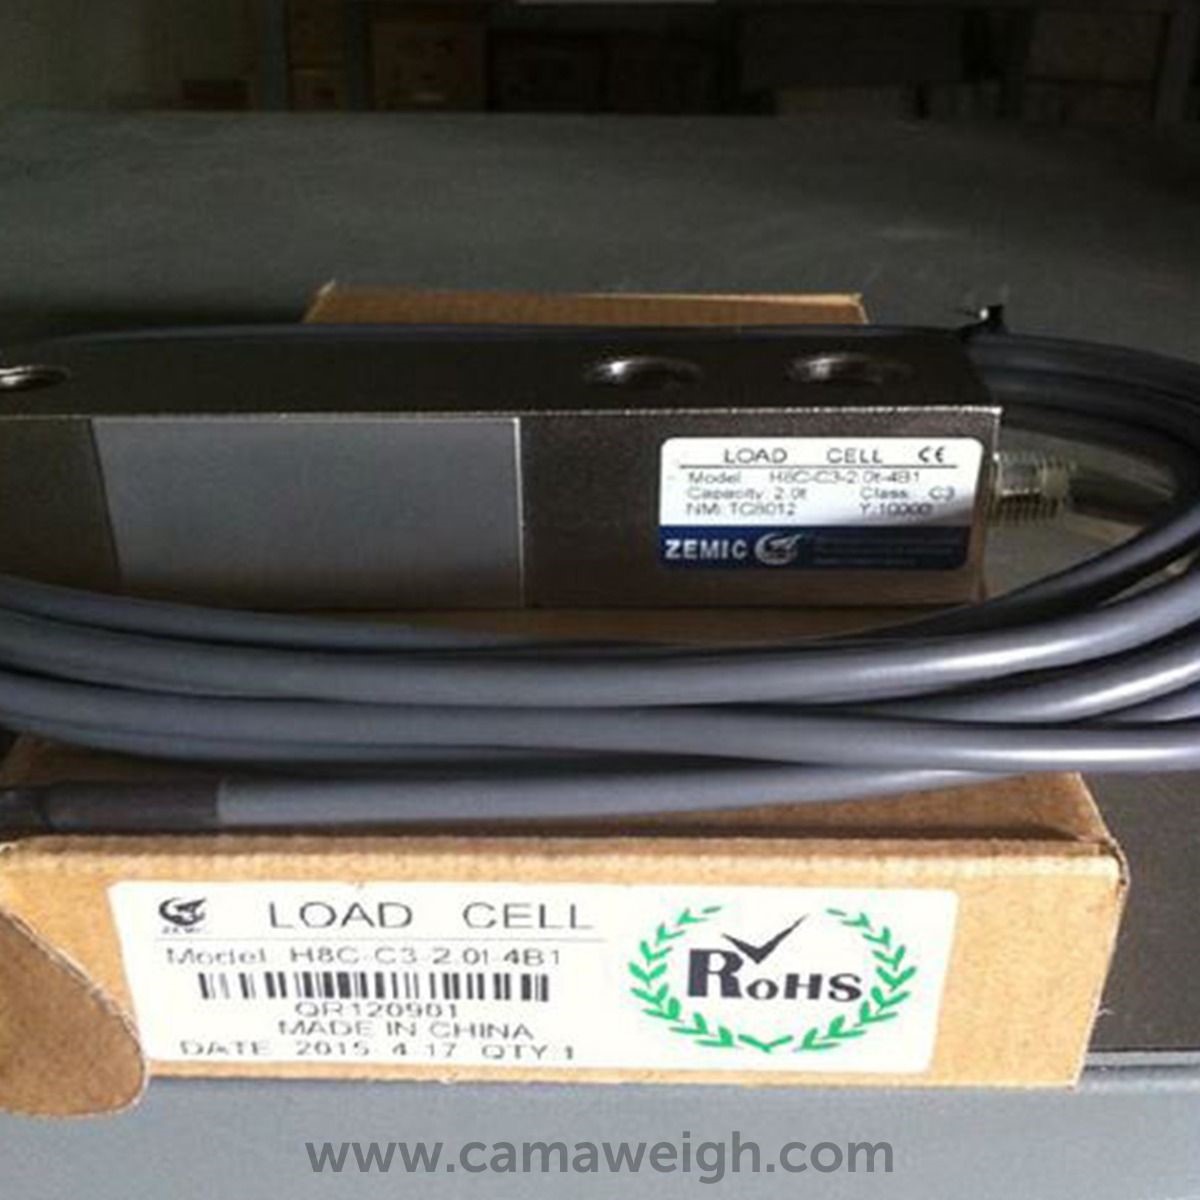 Brand New Zemic load Cell and packaging sold by Camaweigh